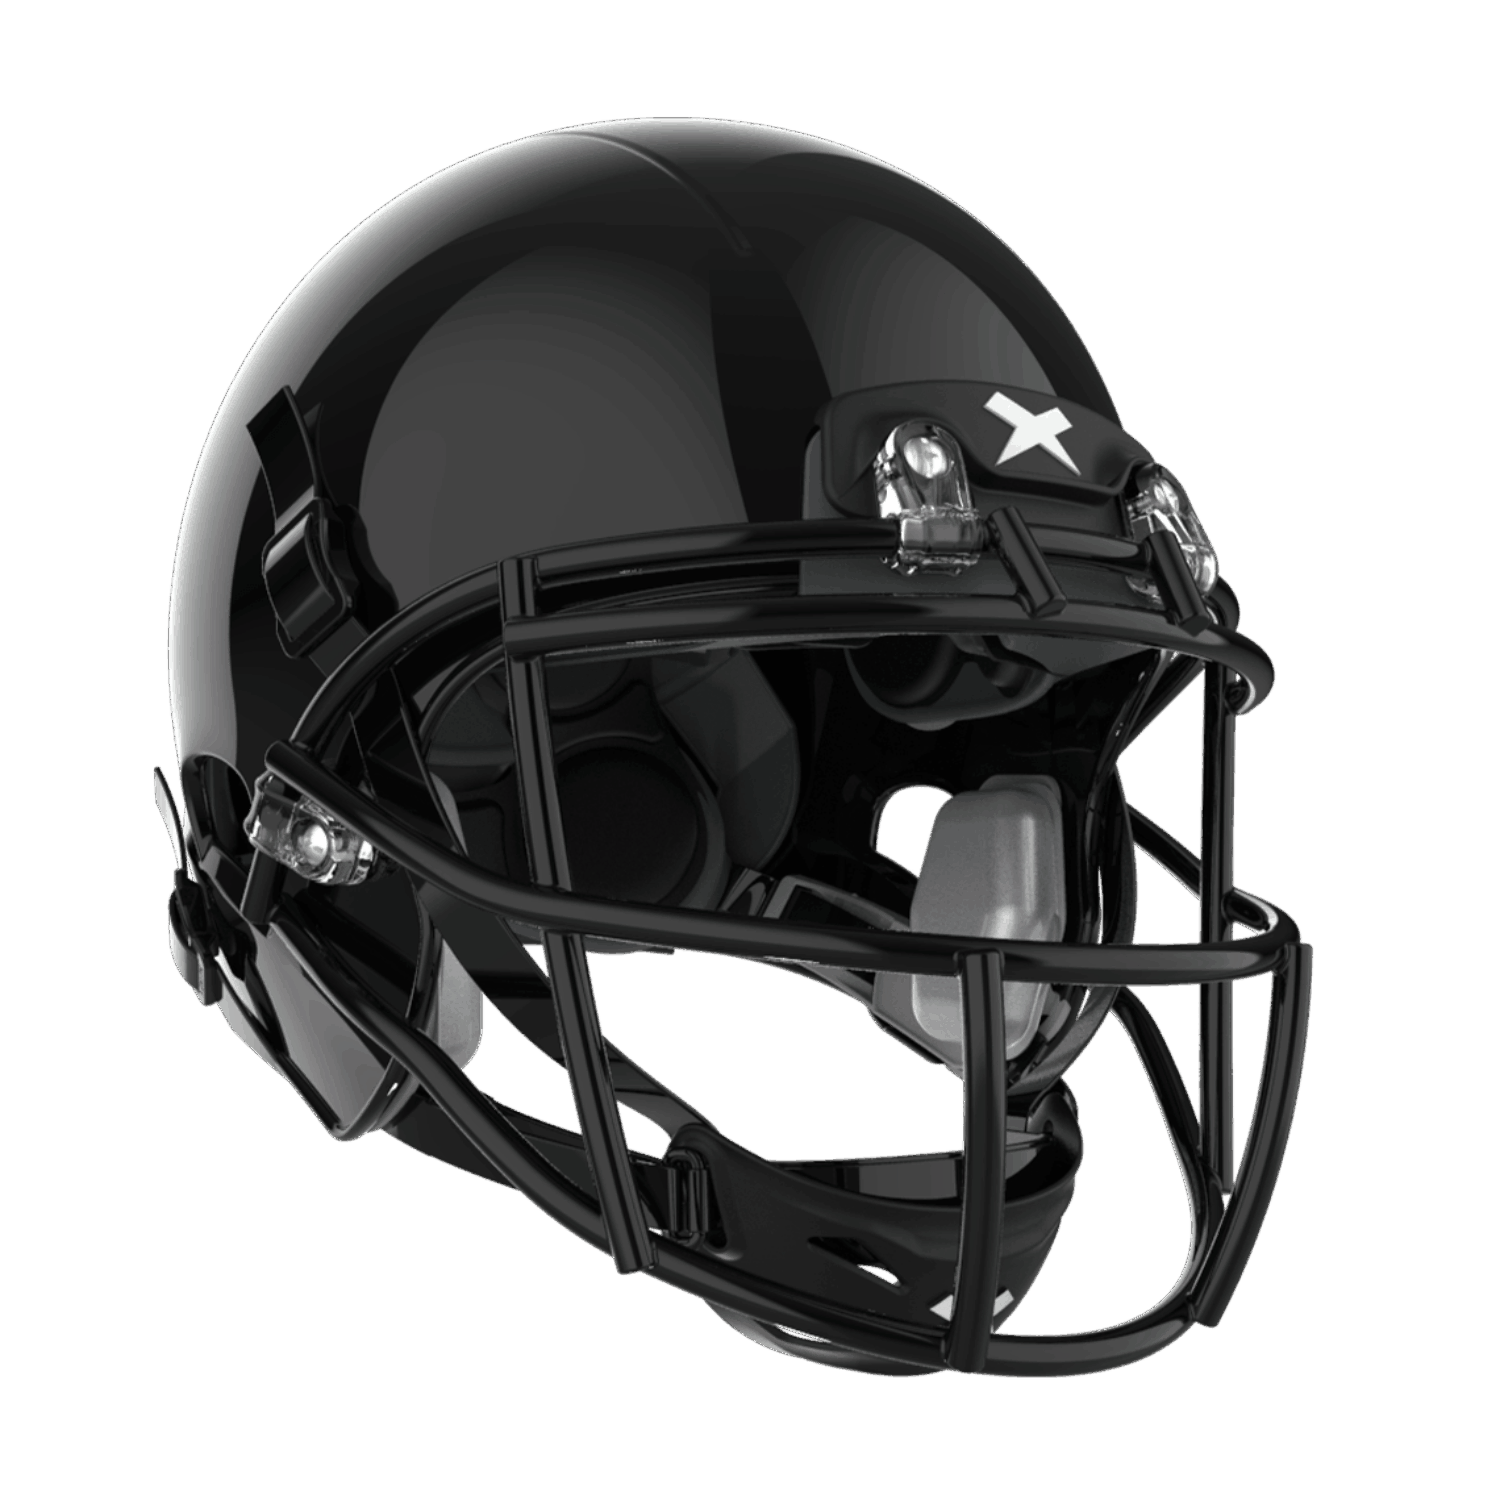 Left facing view X2E+ football helmet with black shell and black Prime facemask.